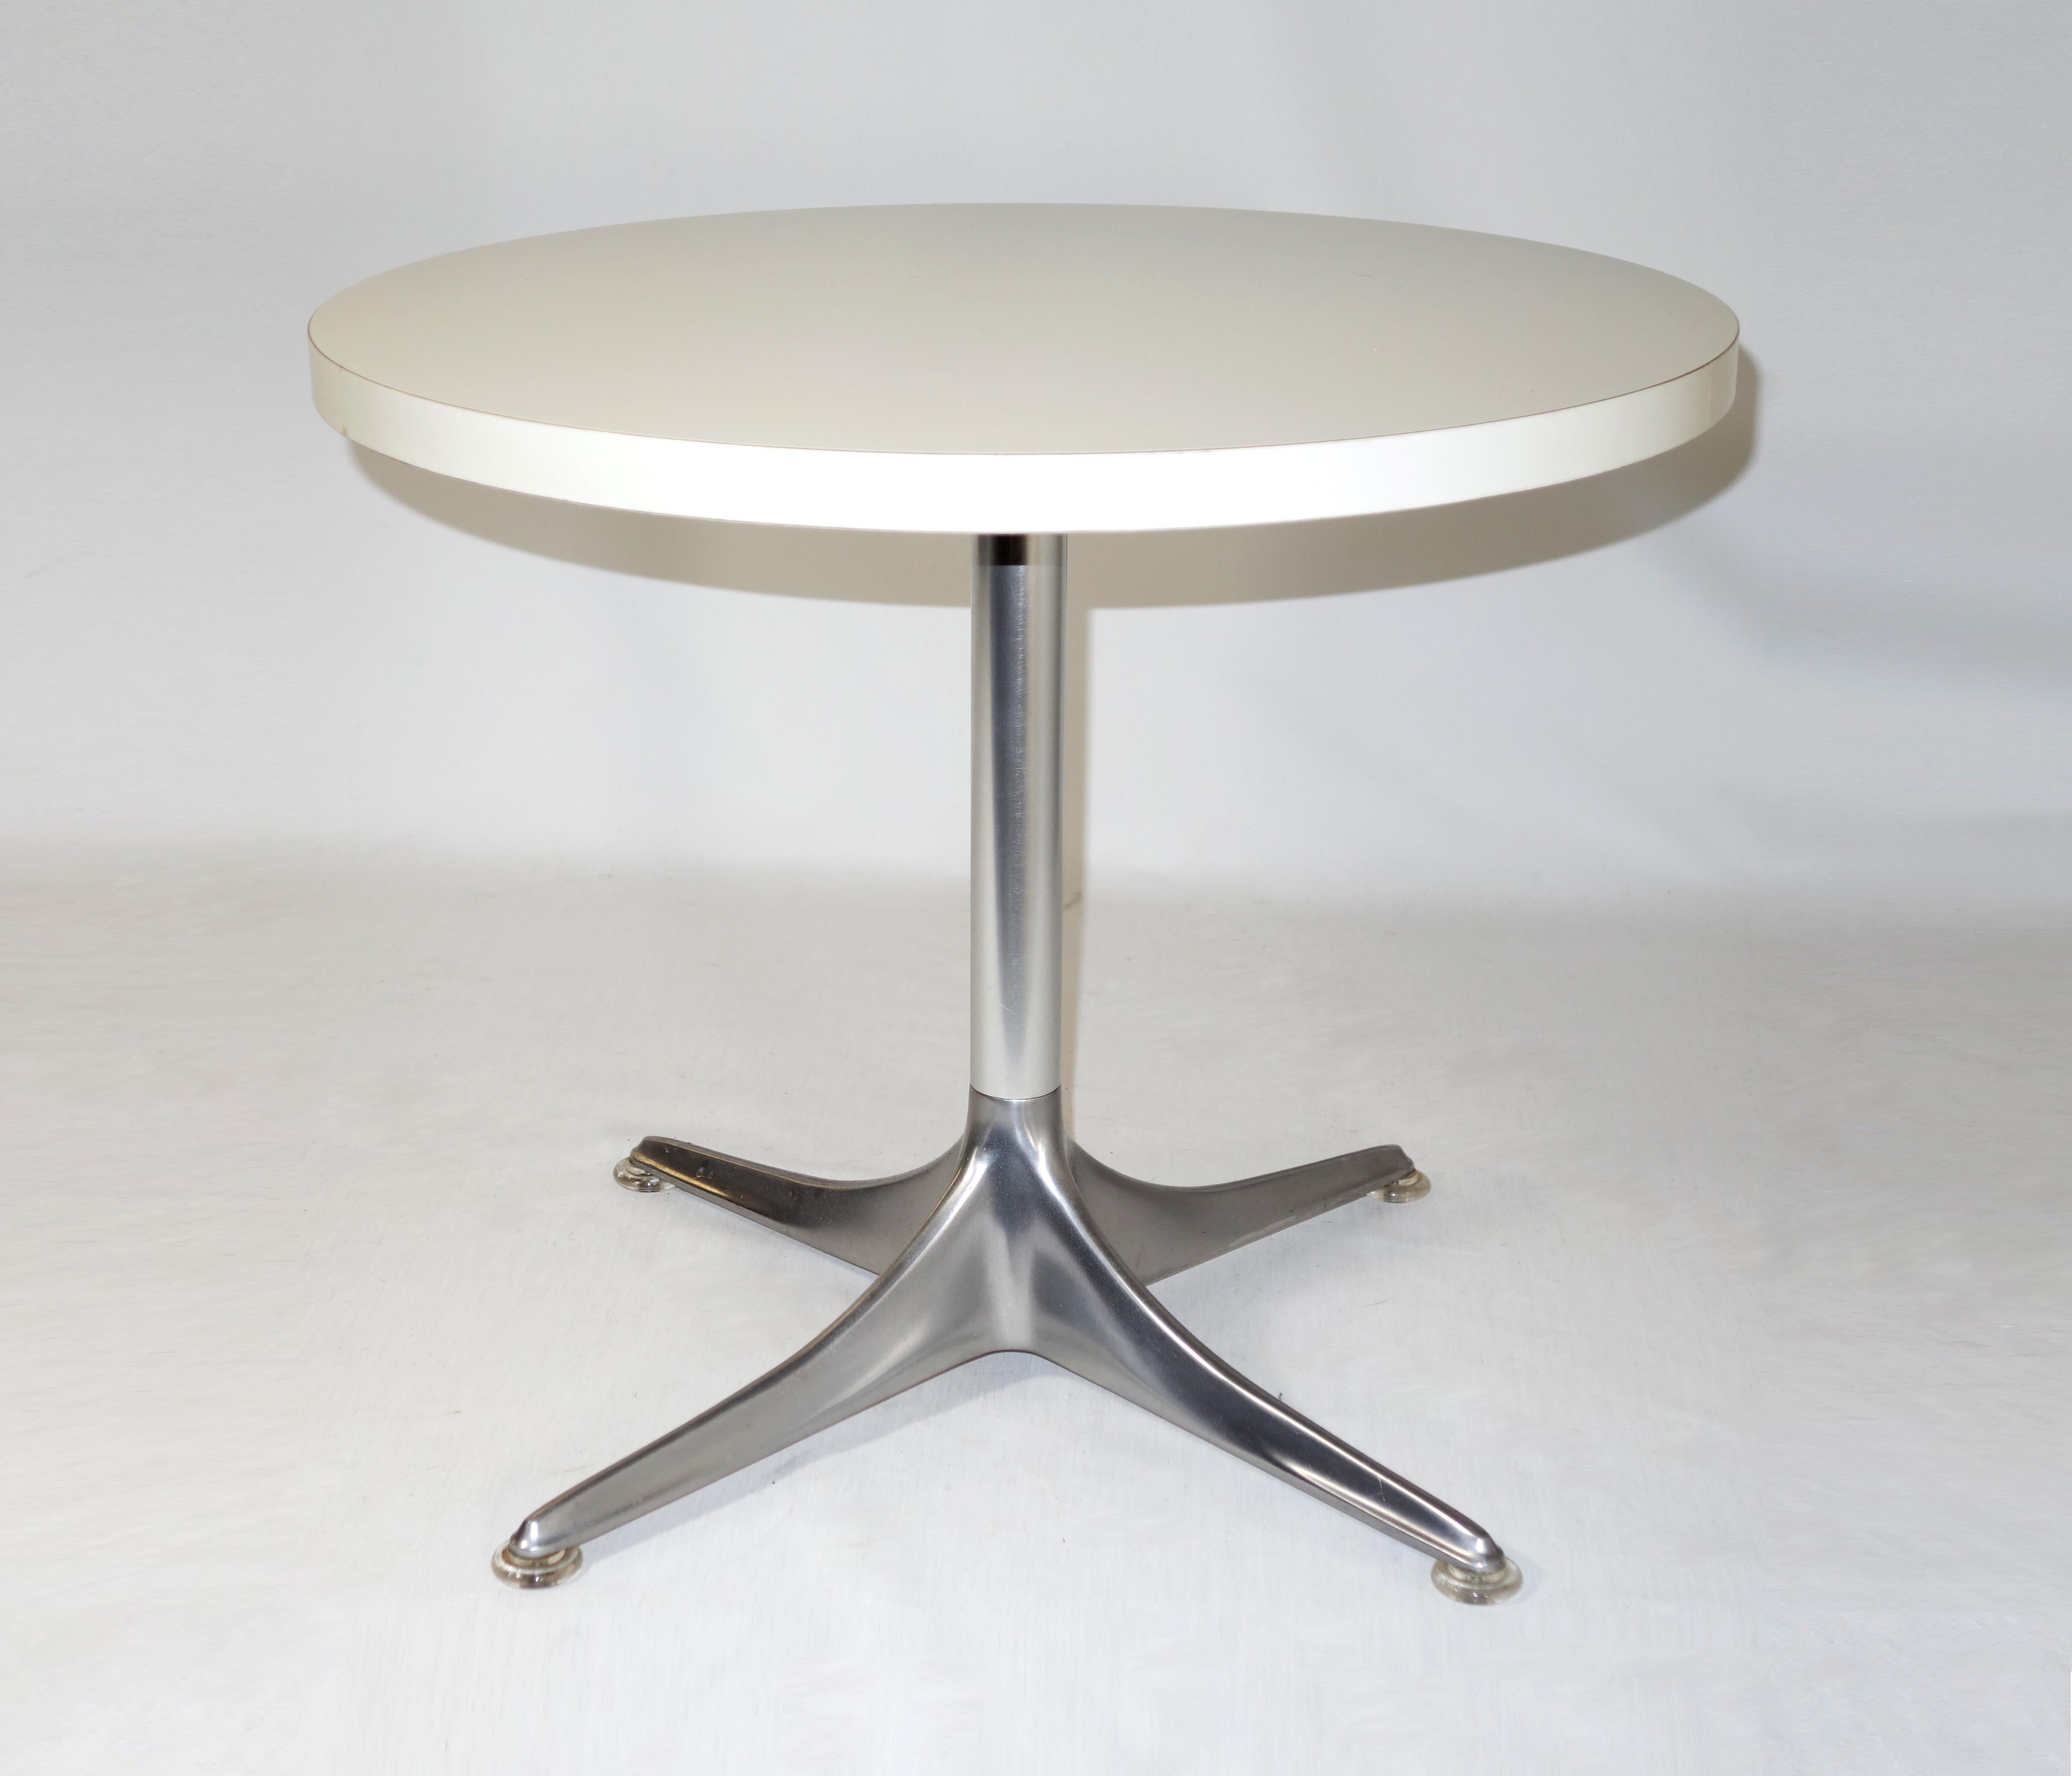 Midcentury Coffee or Occasional Sedia Table F214 by Horst Brüning for COR For Sale 2